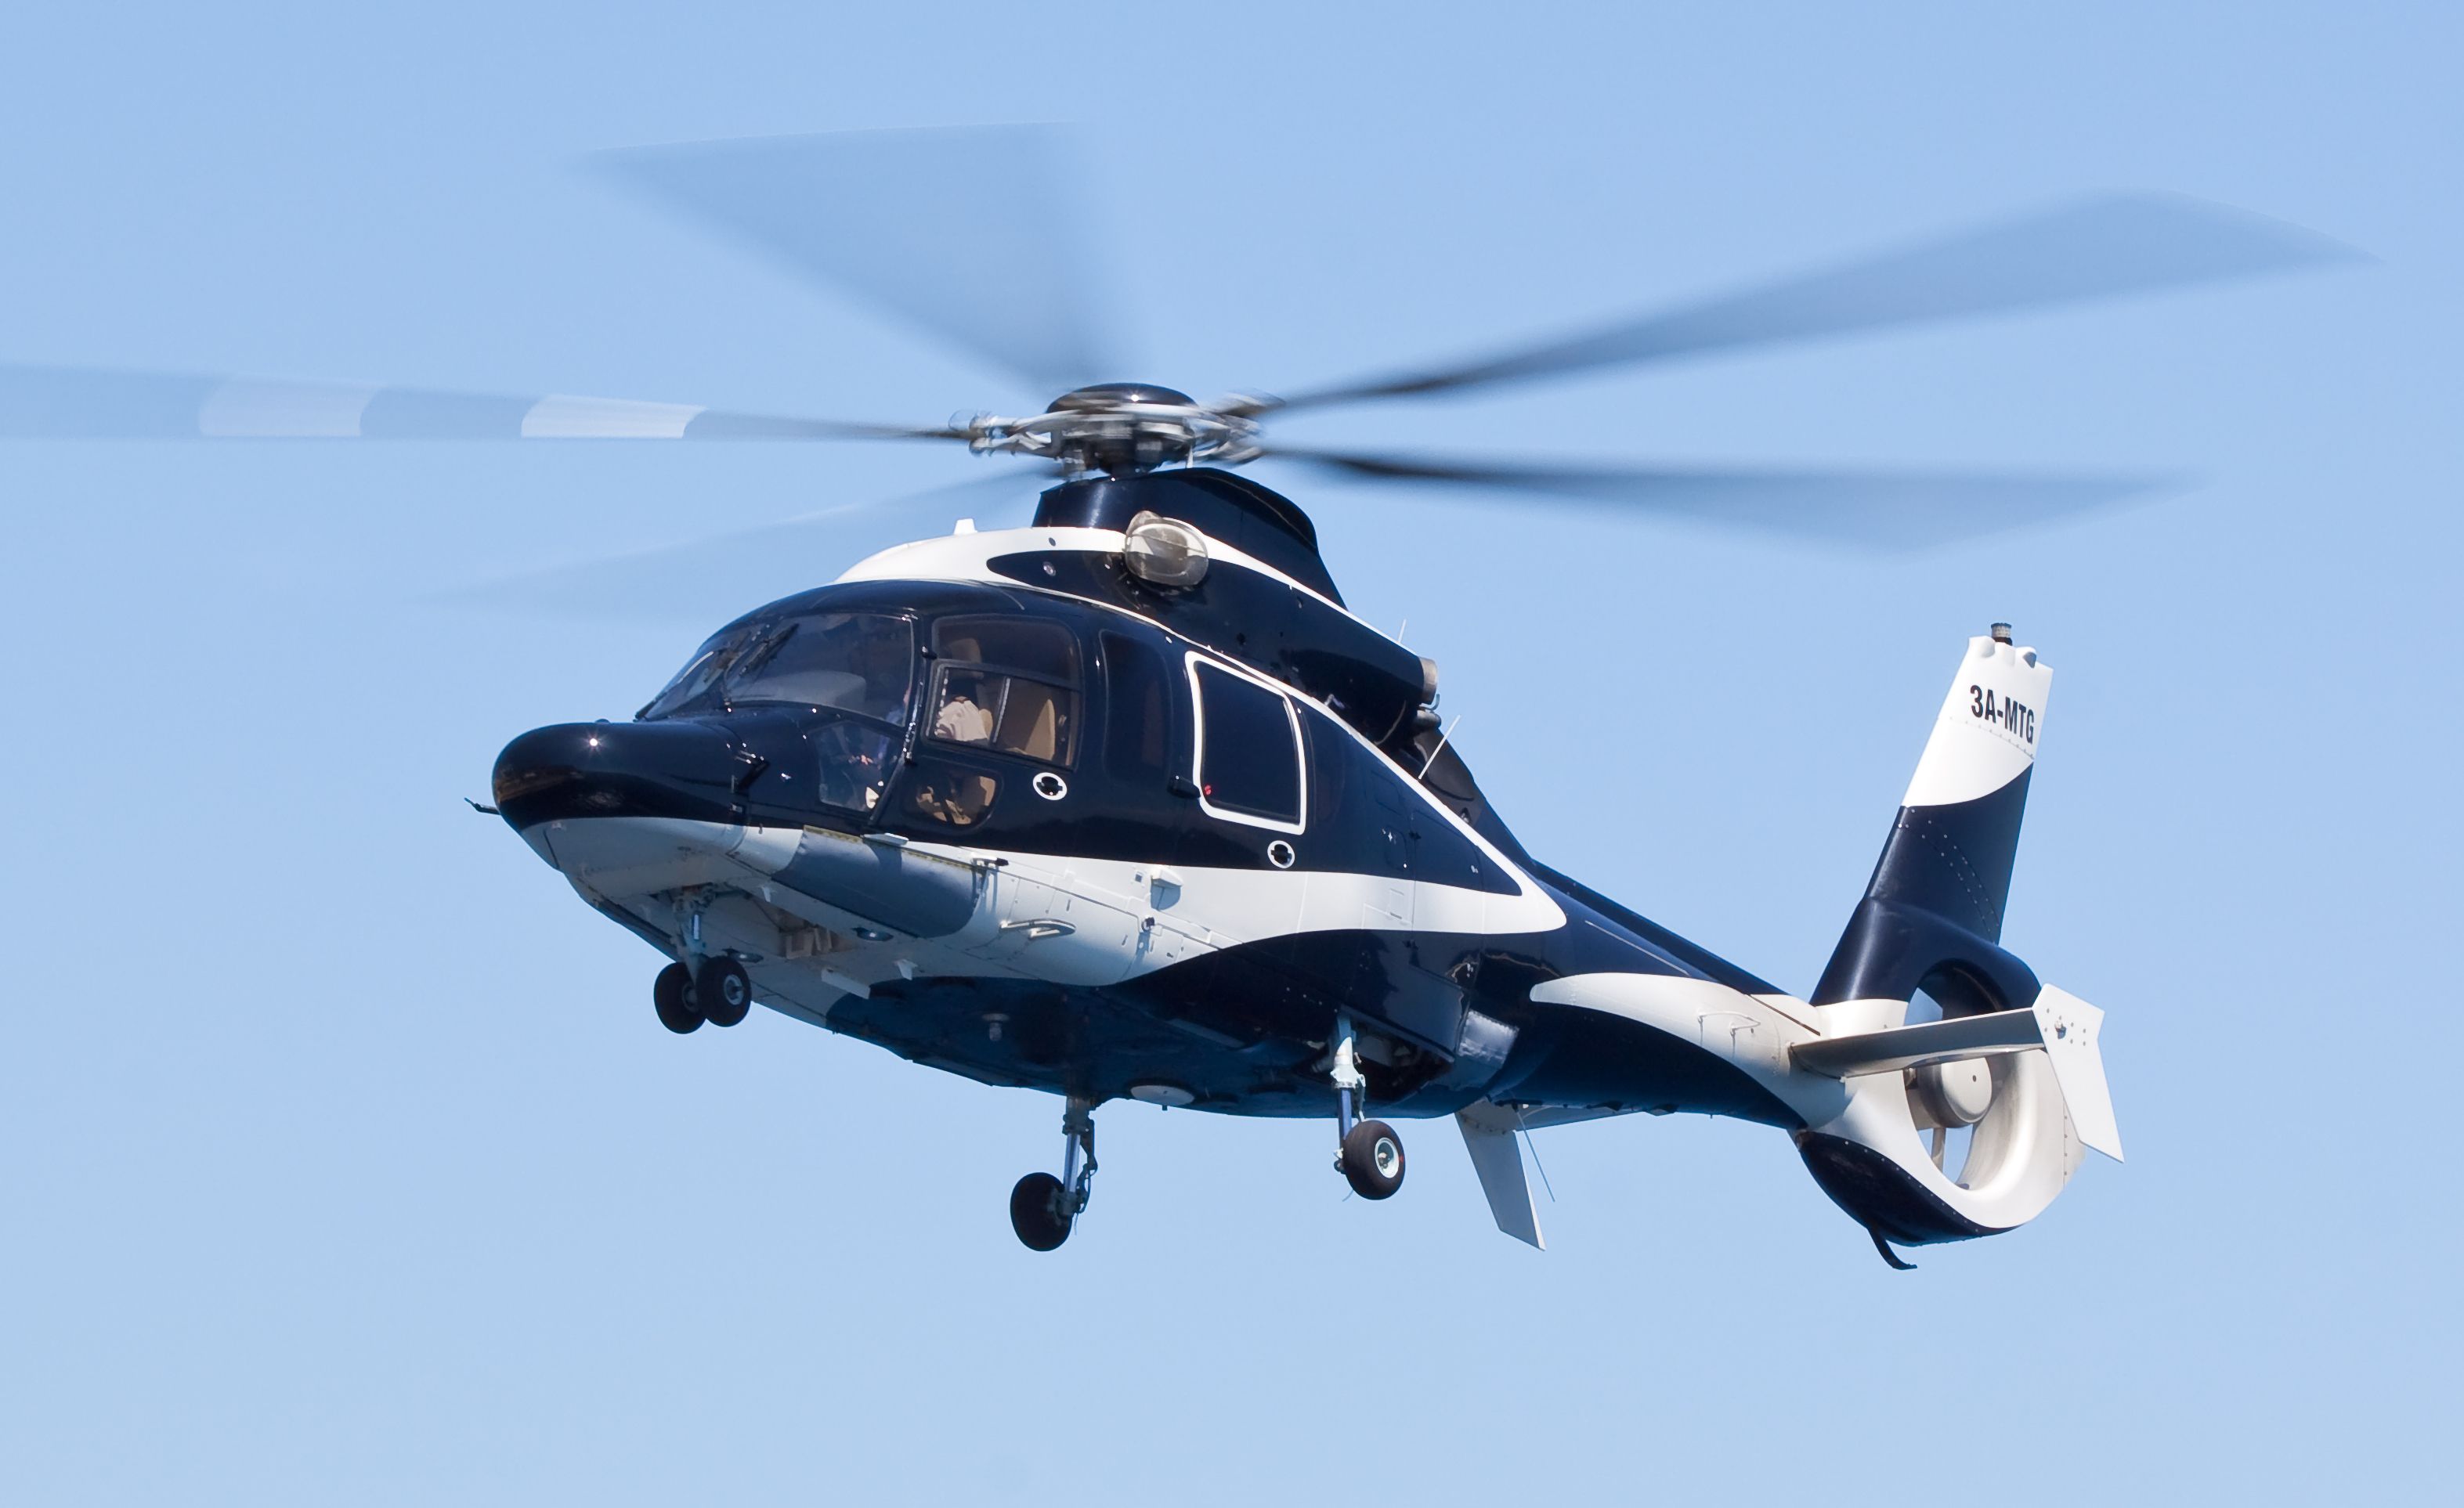 An Airbus H155 helicopter flying in the sky.